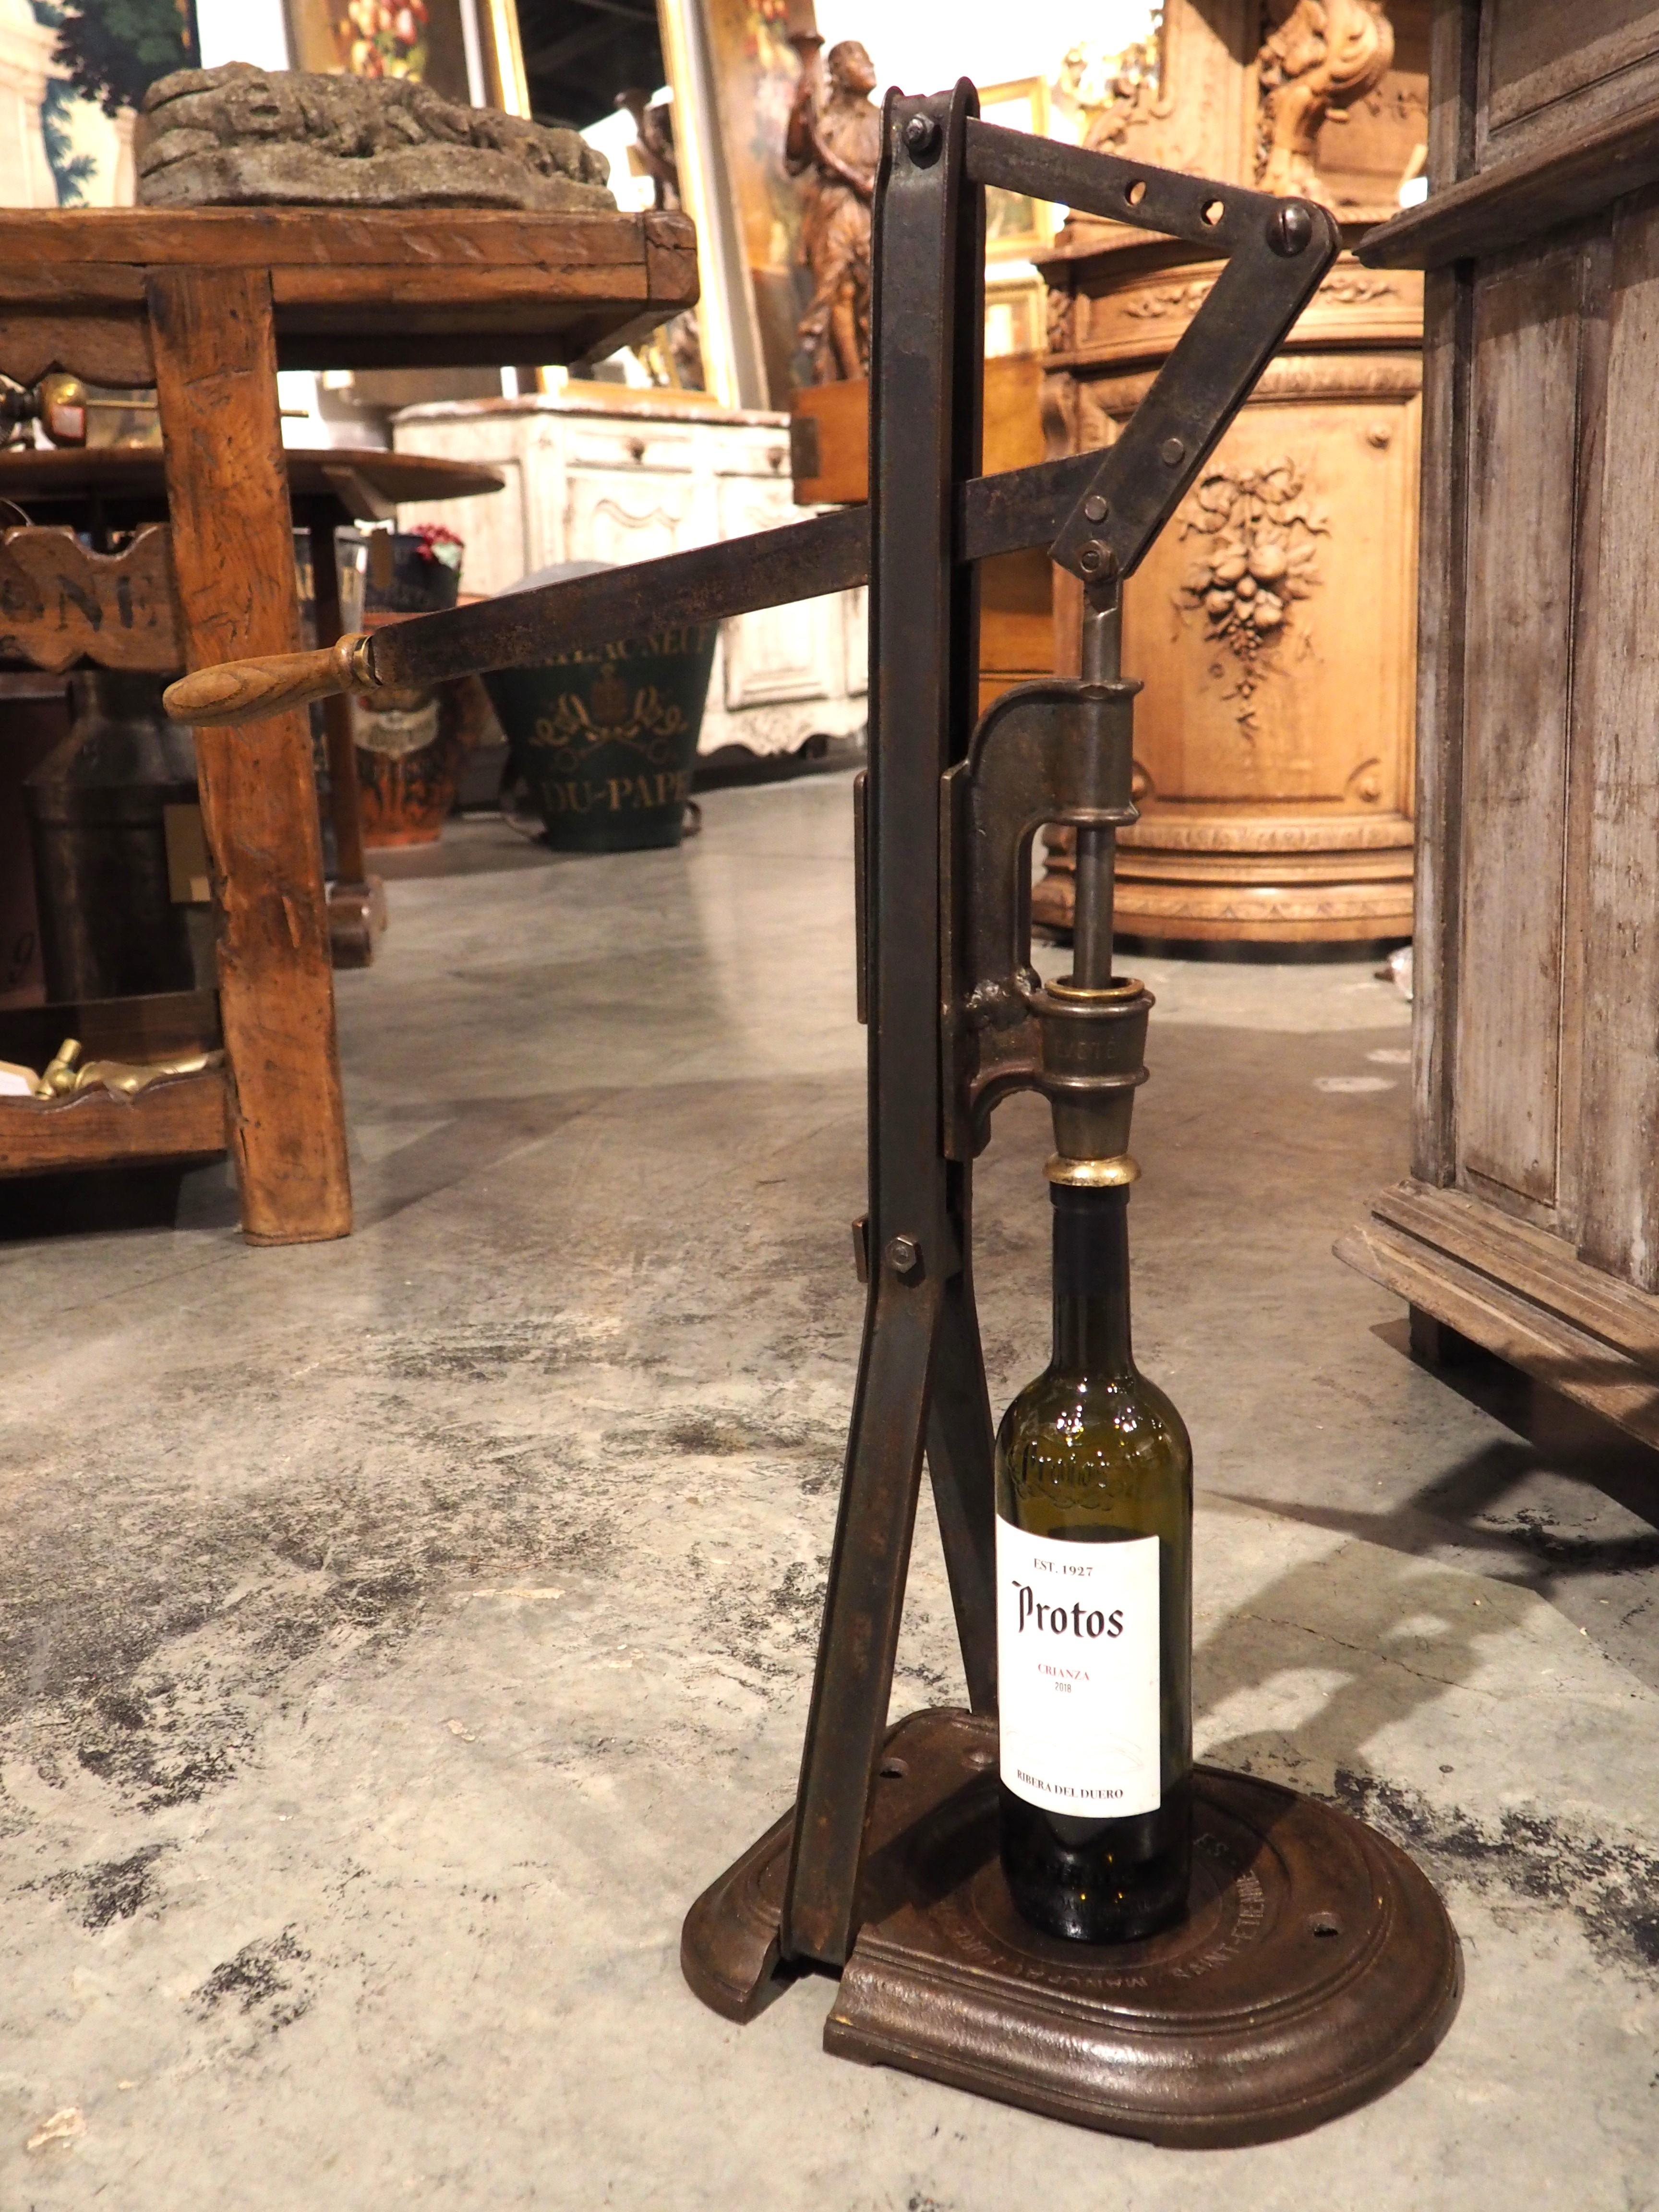 Known in France as a bouchonneuse, this cast iron wine bottle corker would have been used at a French vineyard in the early 1900s. Before the advent of mass production methods, a bouchonneuse such as this would have been bolted to the floor (as